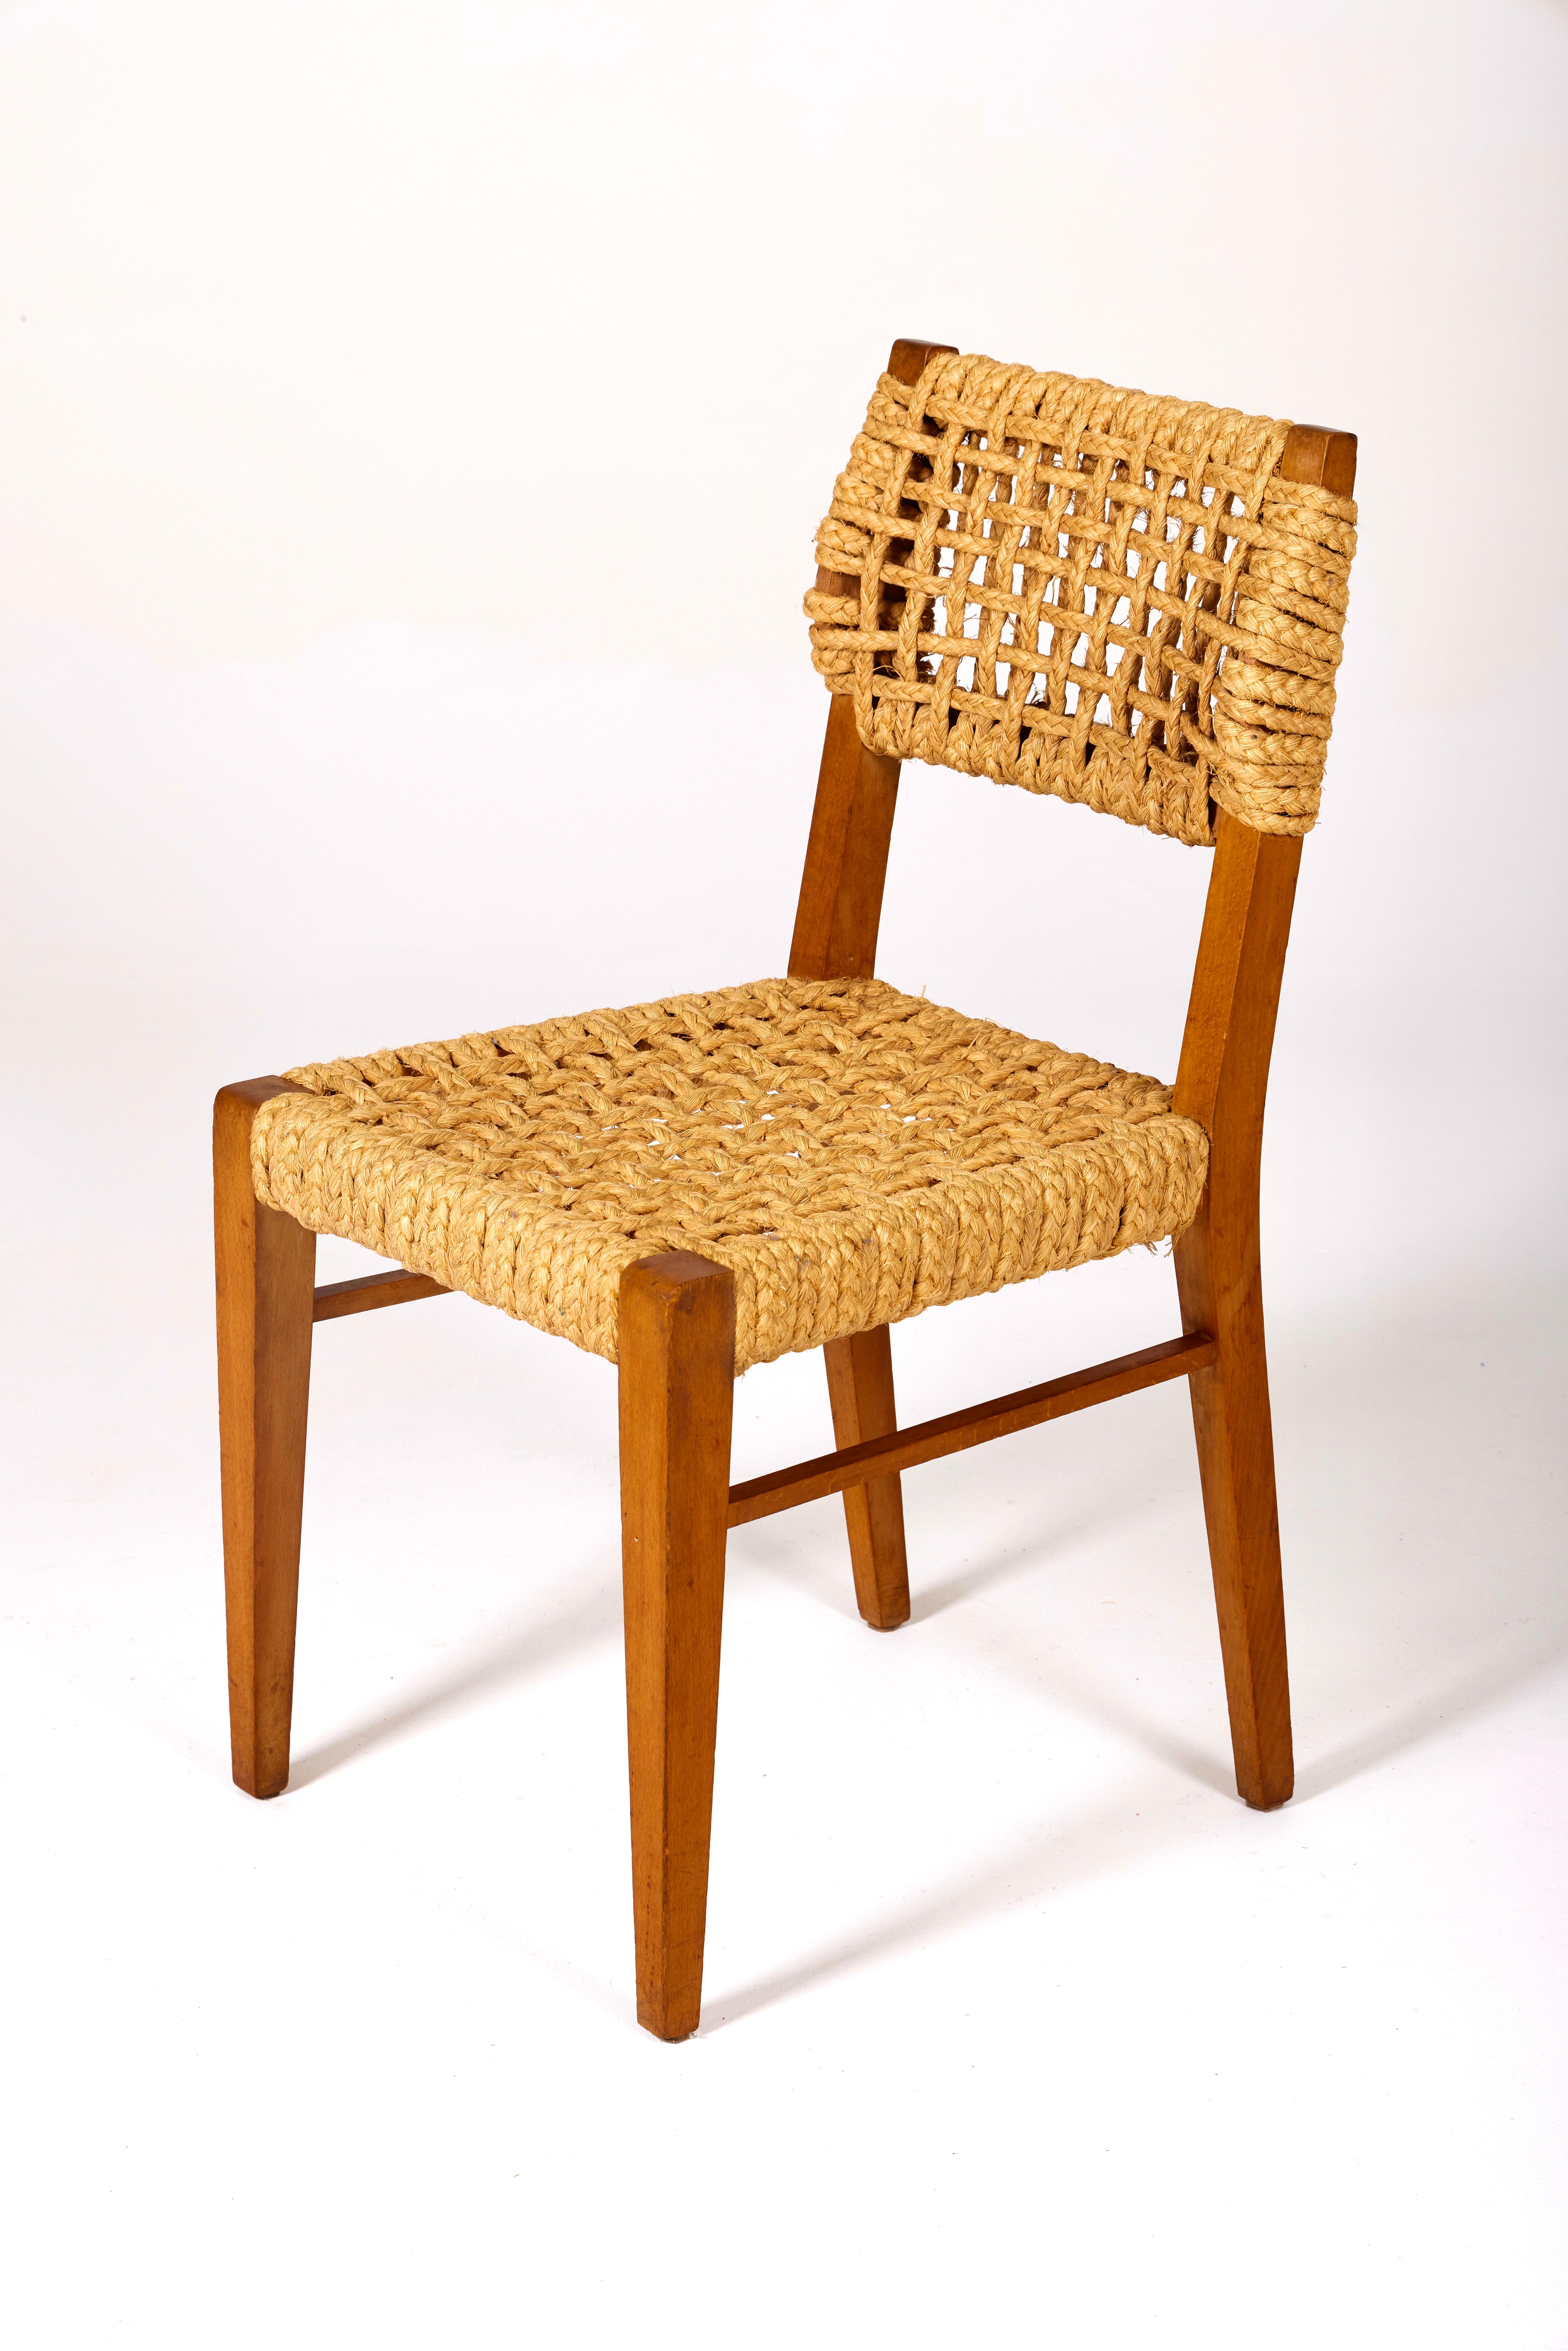 Chair by the French design couple Adrien Audoux & Frida Minet, 1950s. Woven hemp back and seat, wooden frame. Good overall condition with some signs of wear on the weaving.
LP1183